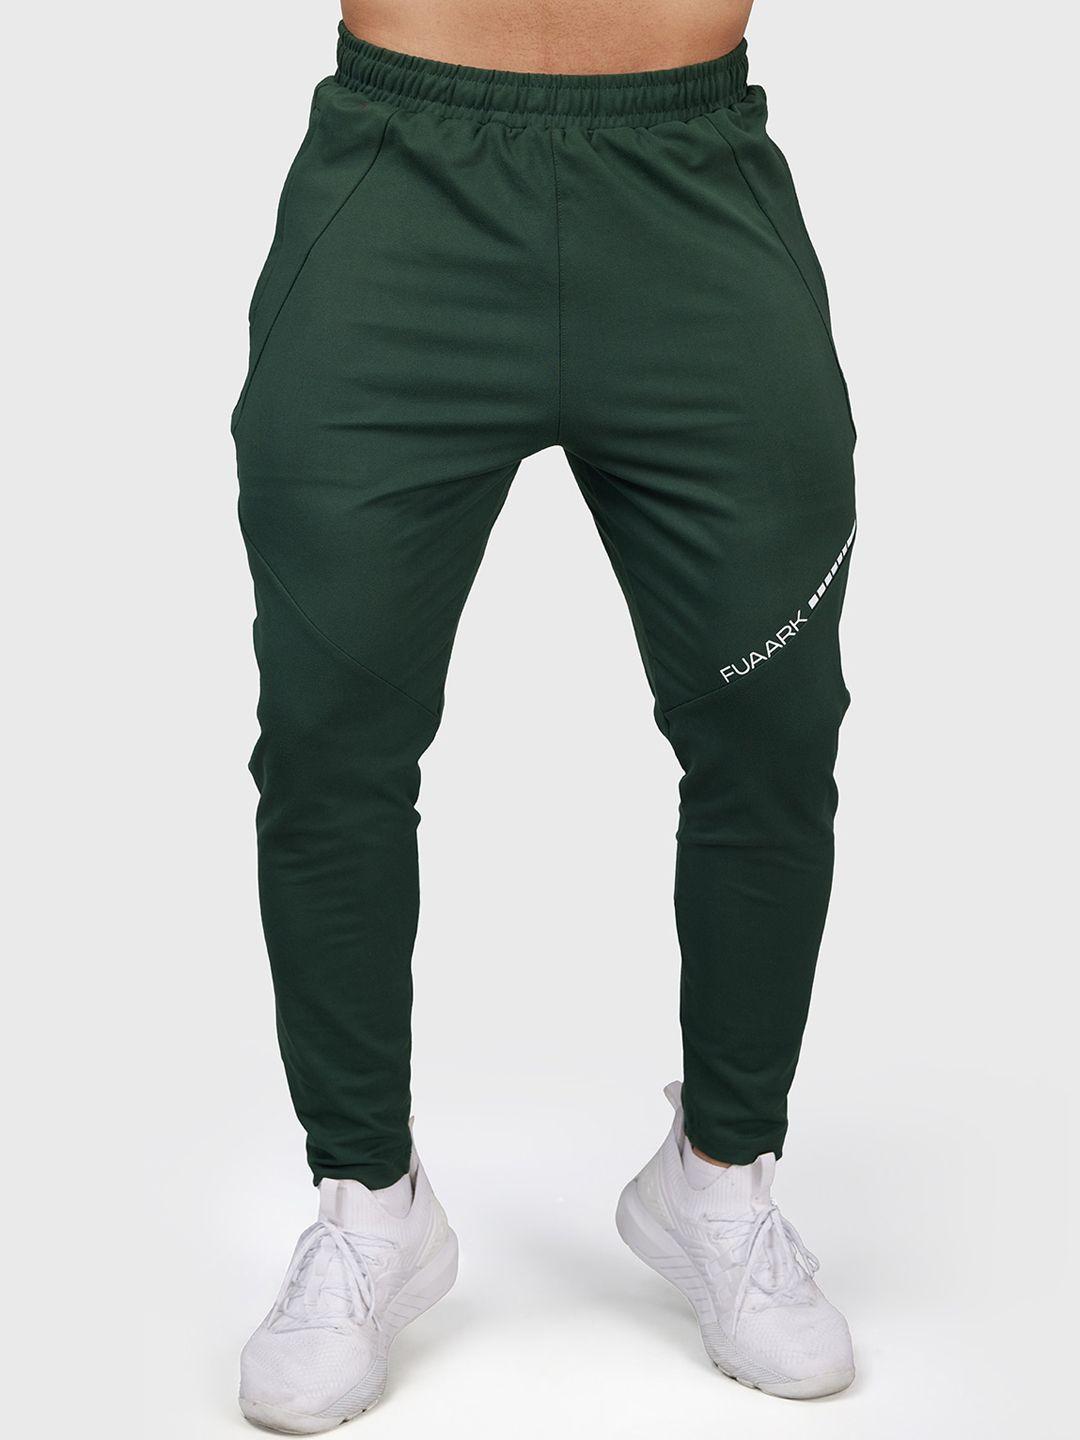 fuaark-men-slim-fit-mid-rise-antimicrobial-joggers